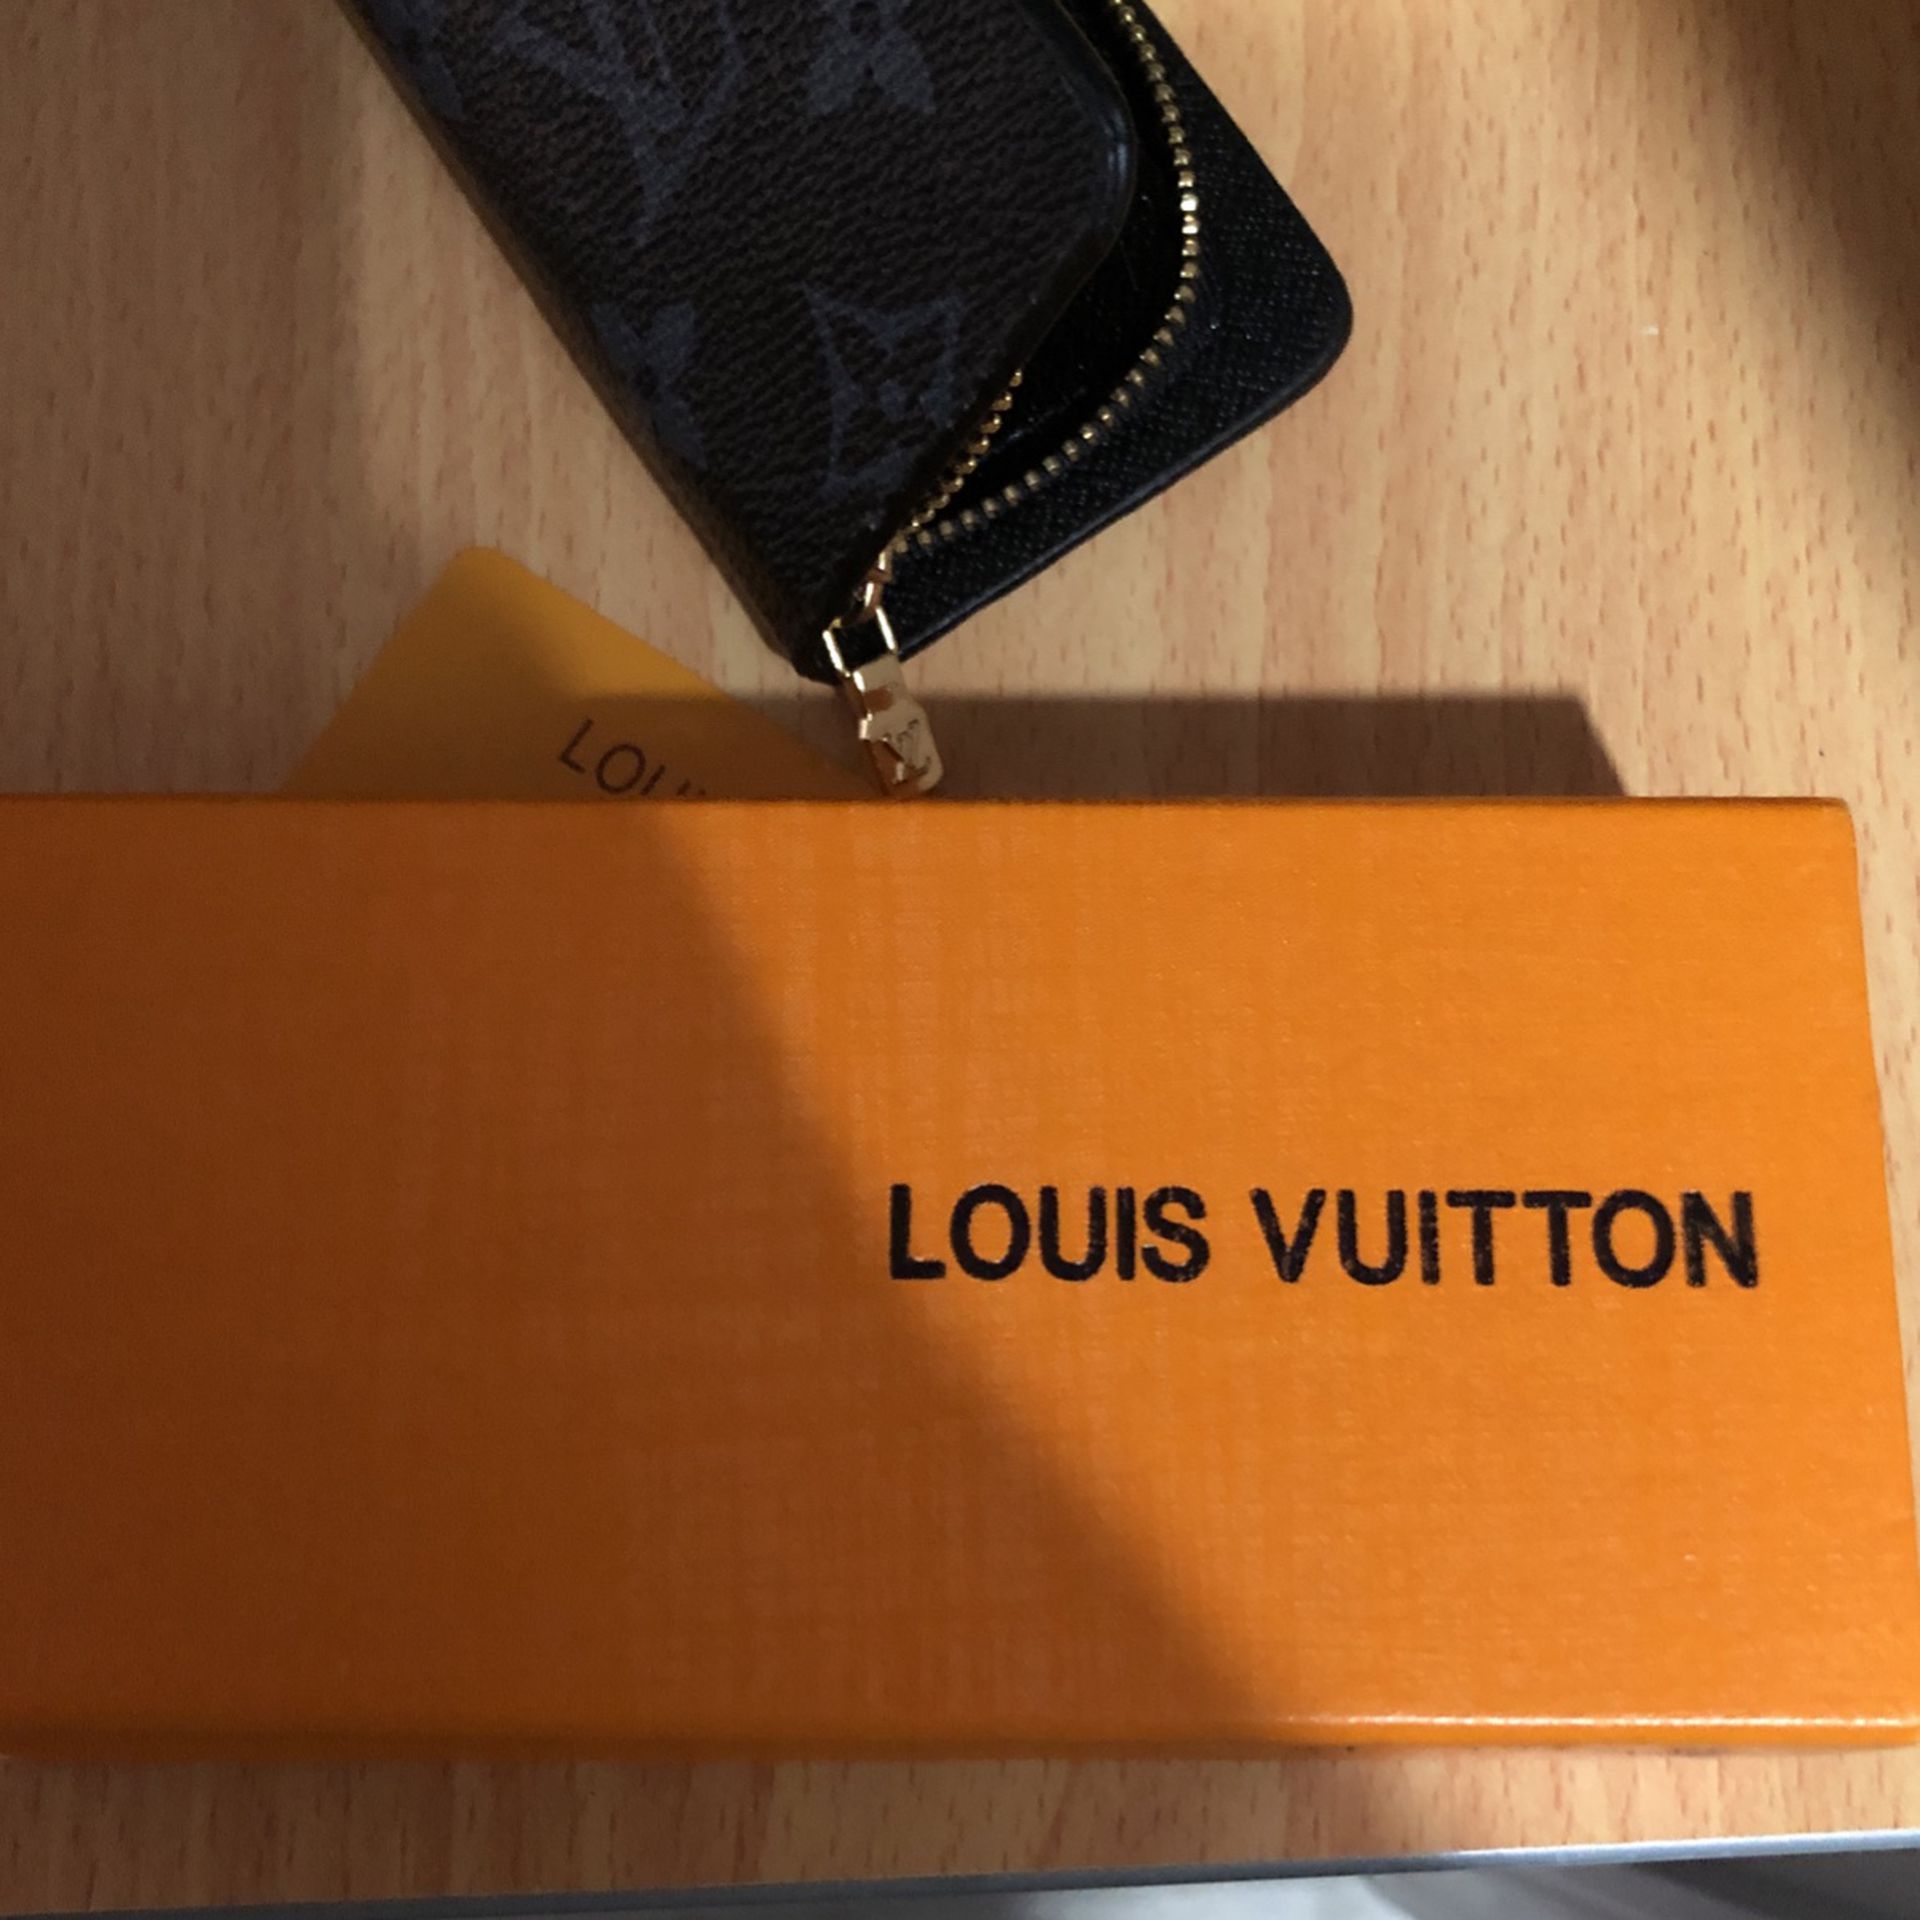 Compare prices for LV Lanyard Key Holder (M68278) in official stores